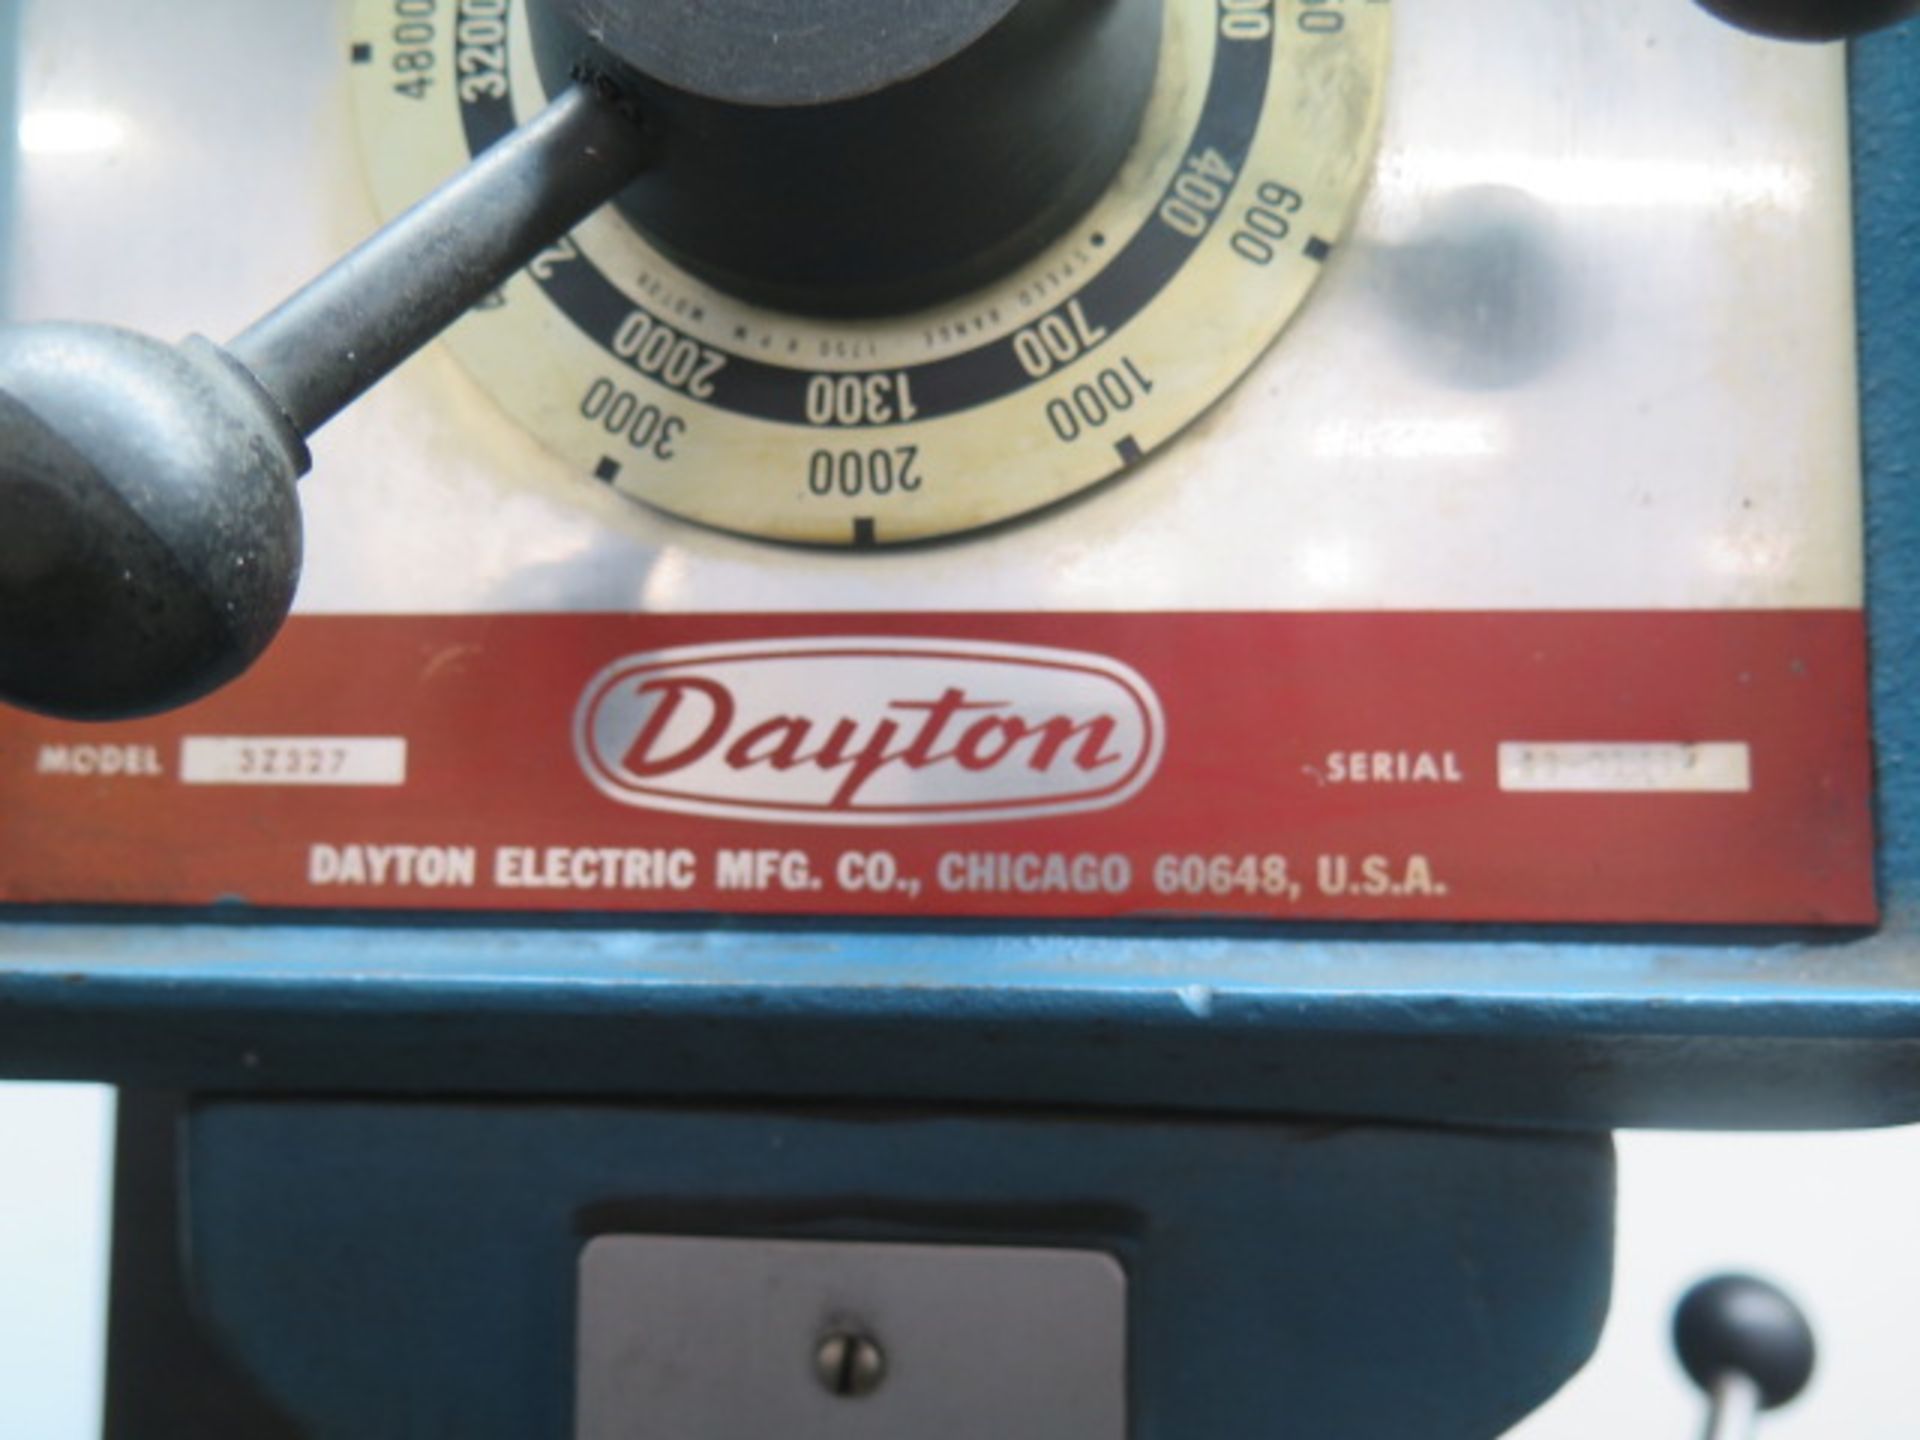 Dayton 3Z327 Variable Speed Pedestal Drill Press w/ 300-4800 Dial RPM - Image 6 of 6